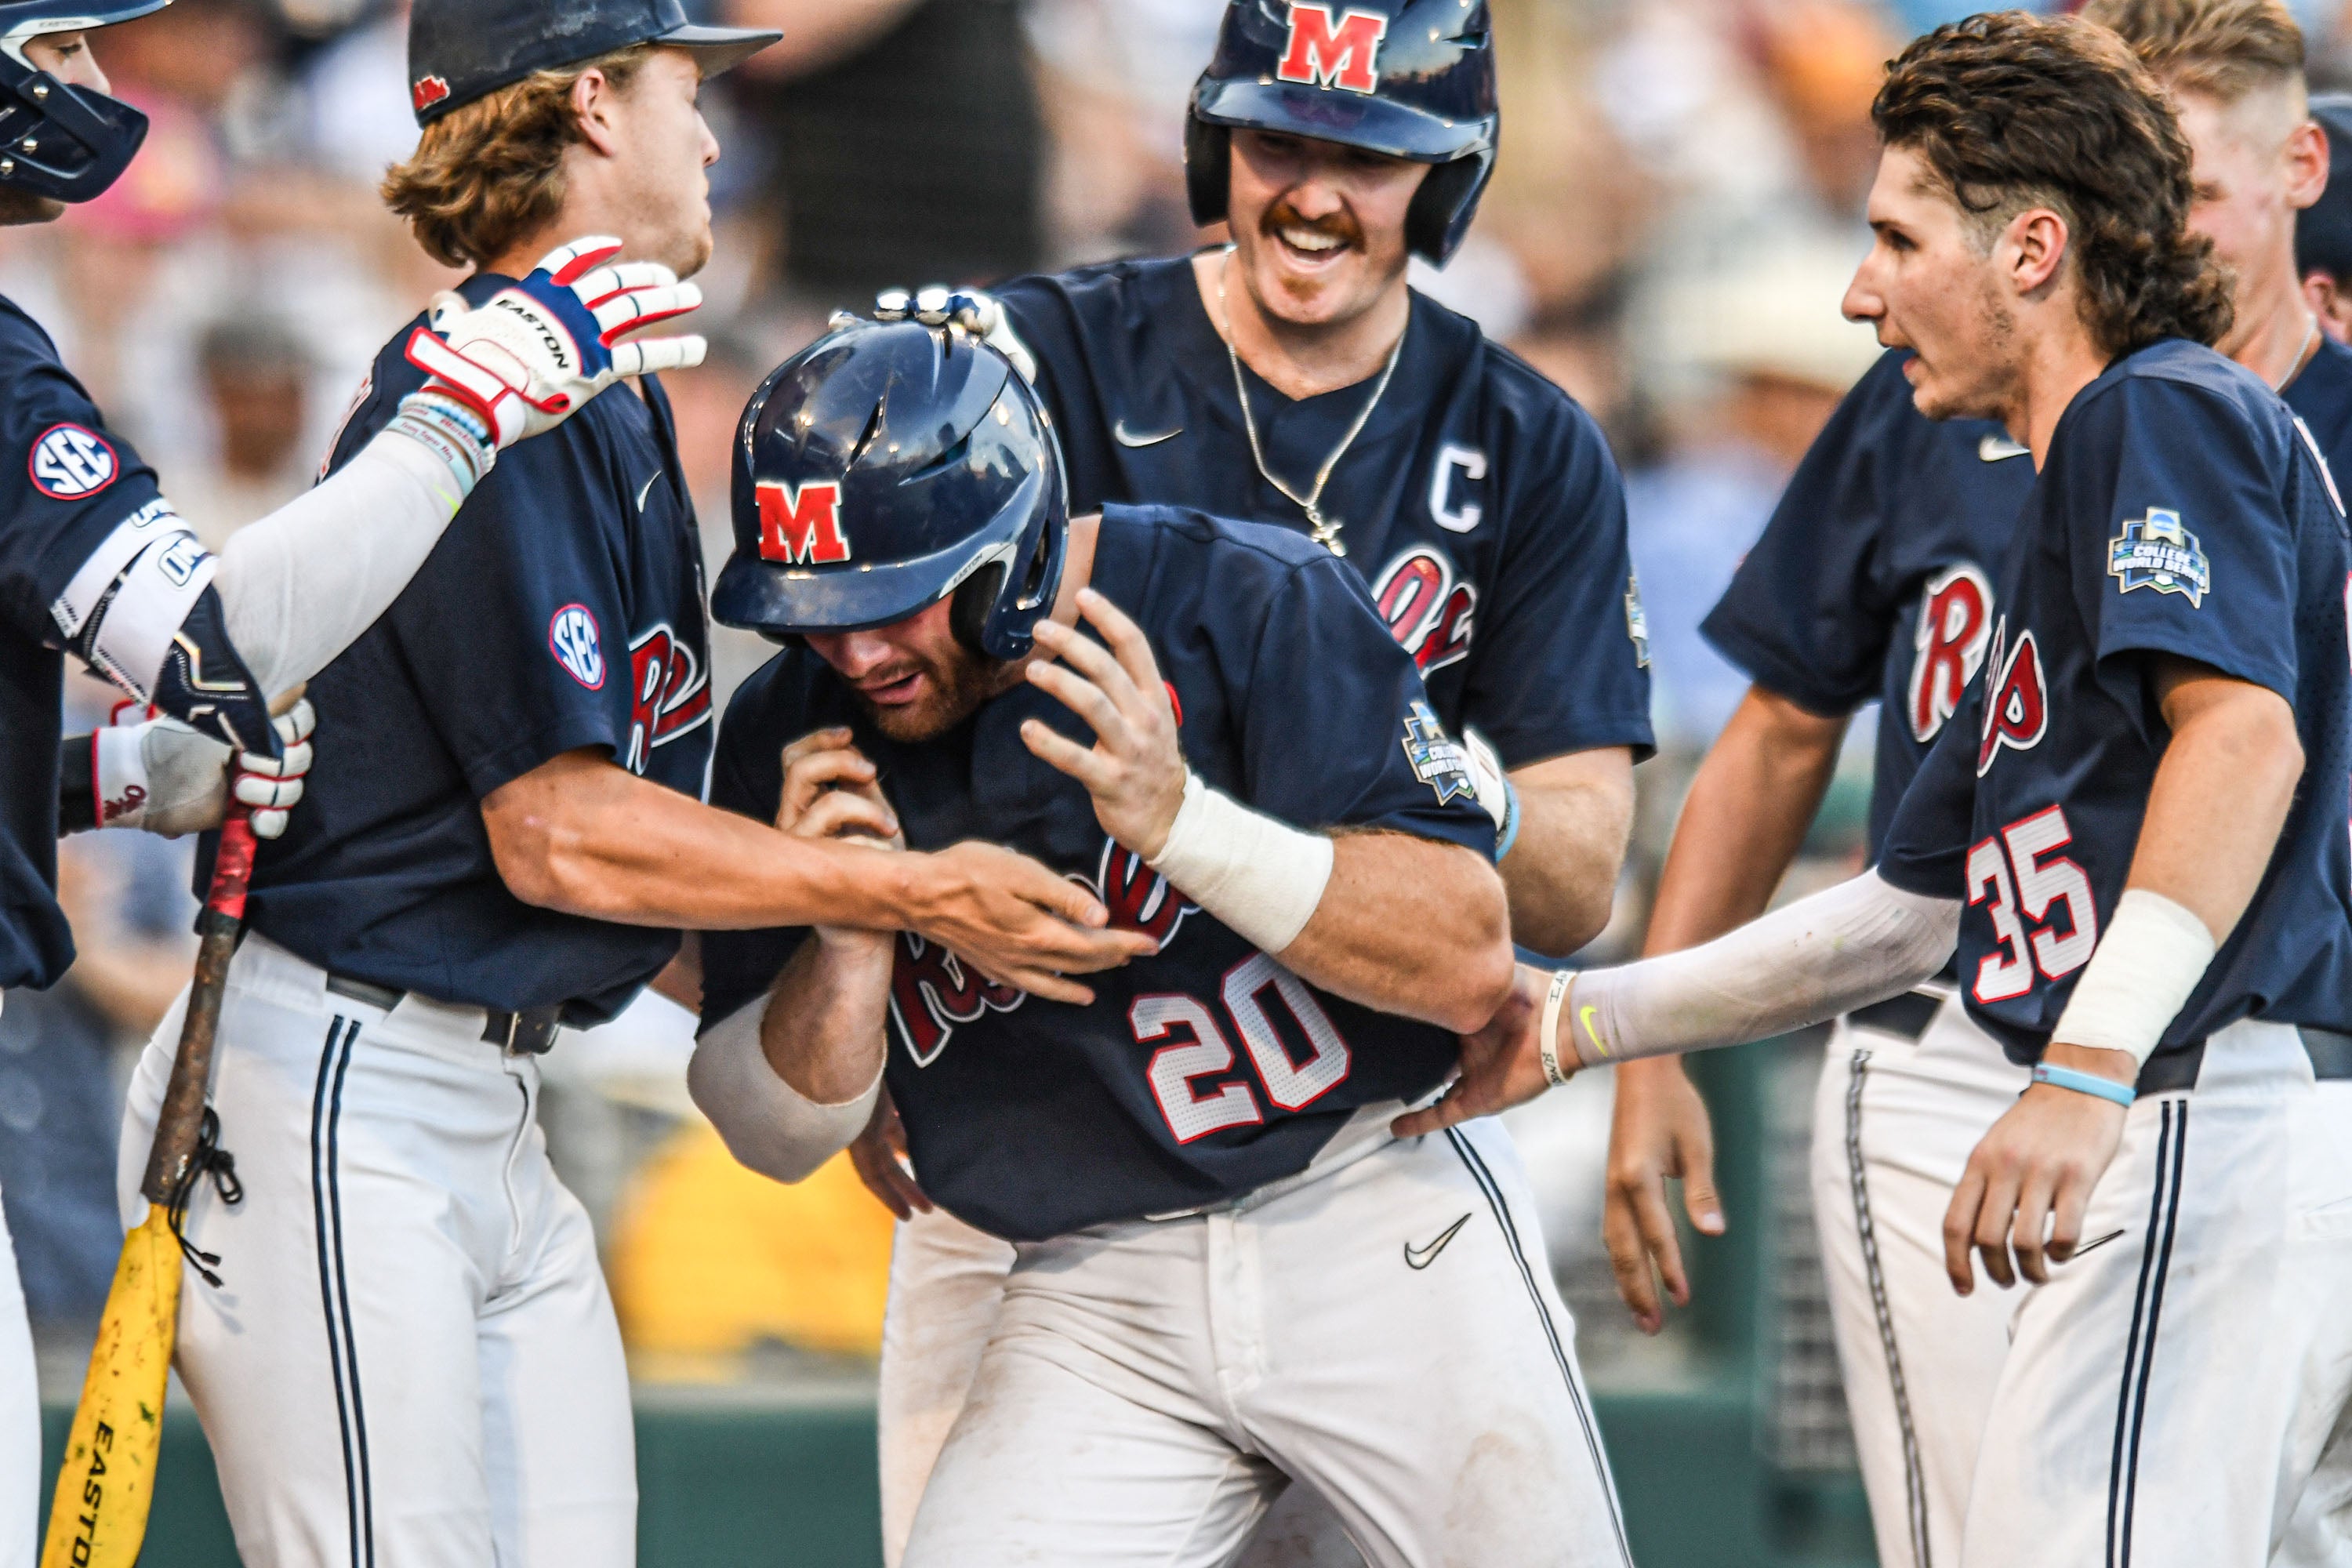 Gallery Ole Miss Knocks Off Arkansas To Reach Cws Semifinals The Oxford Eagle The Oxford Eagle